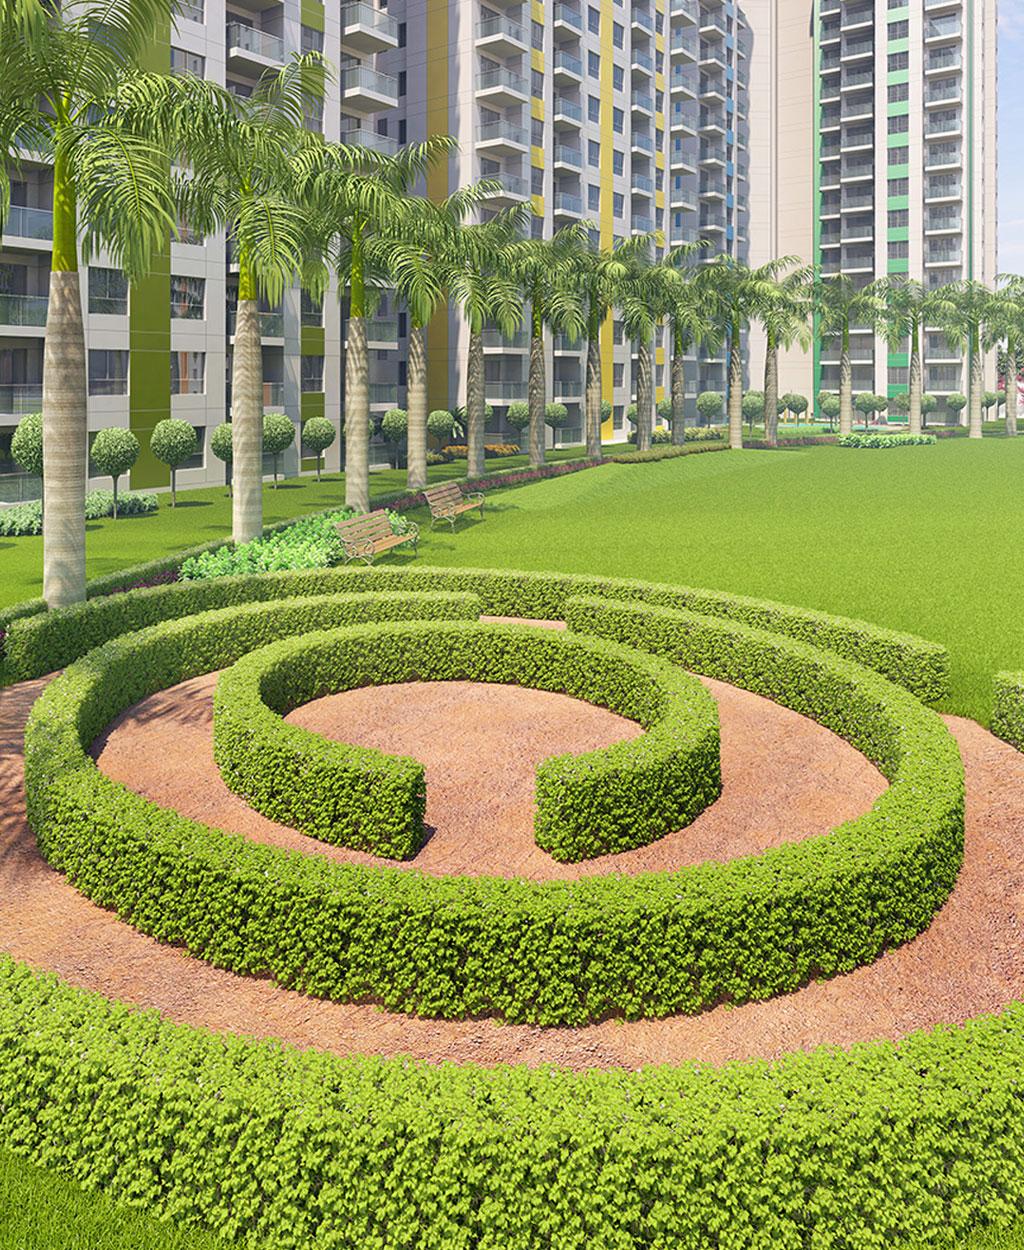 Residential property in mohali